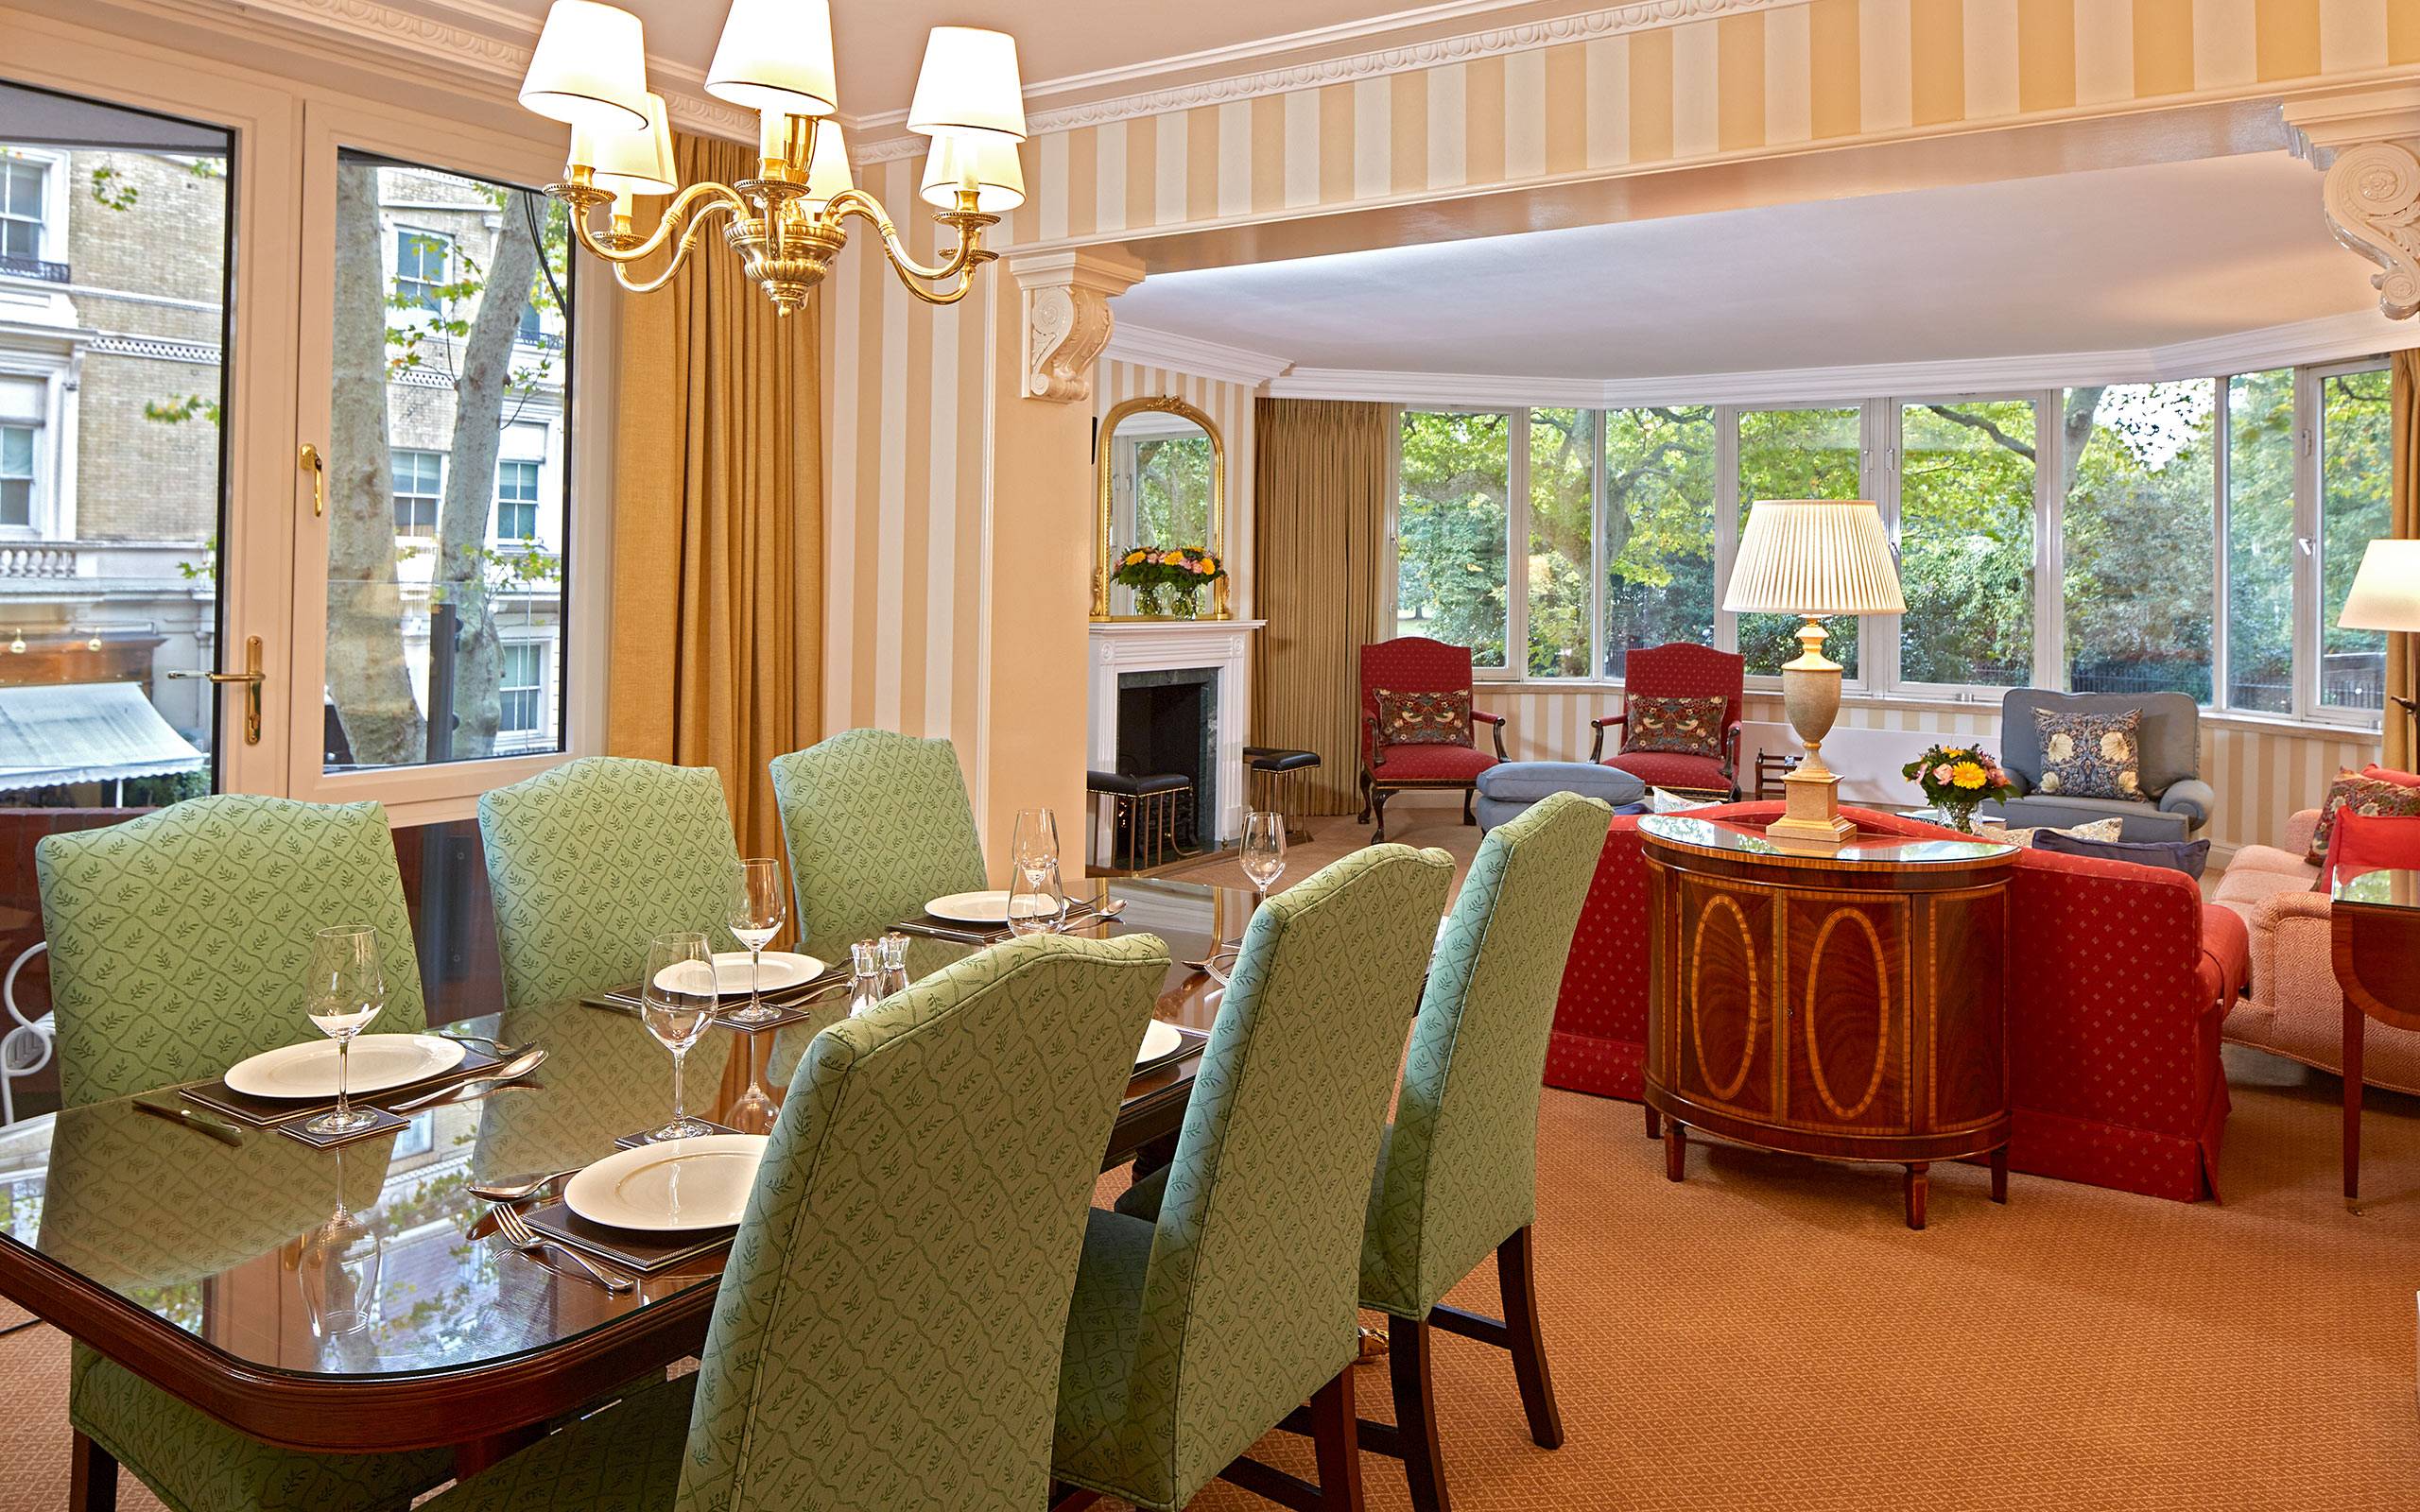 Three-Bedroom Serviced Apartment in prestigious Kensington Gardens with Hyde Park Views and Luxury Amenities